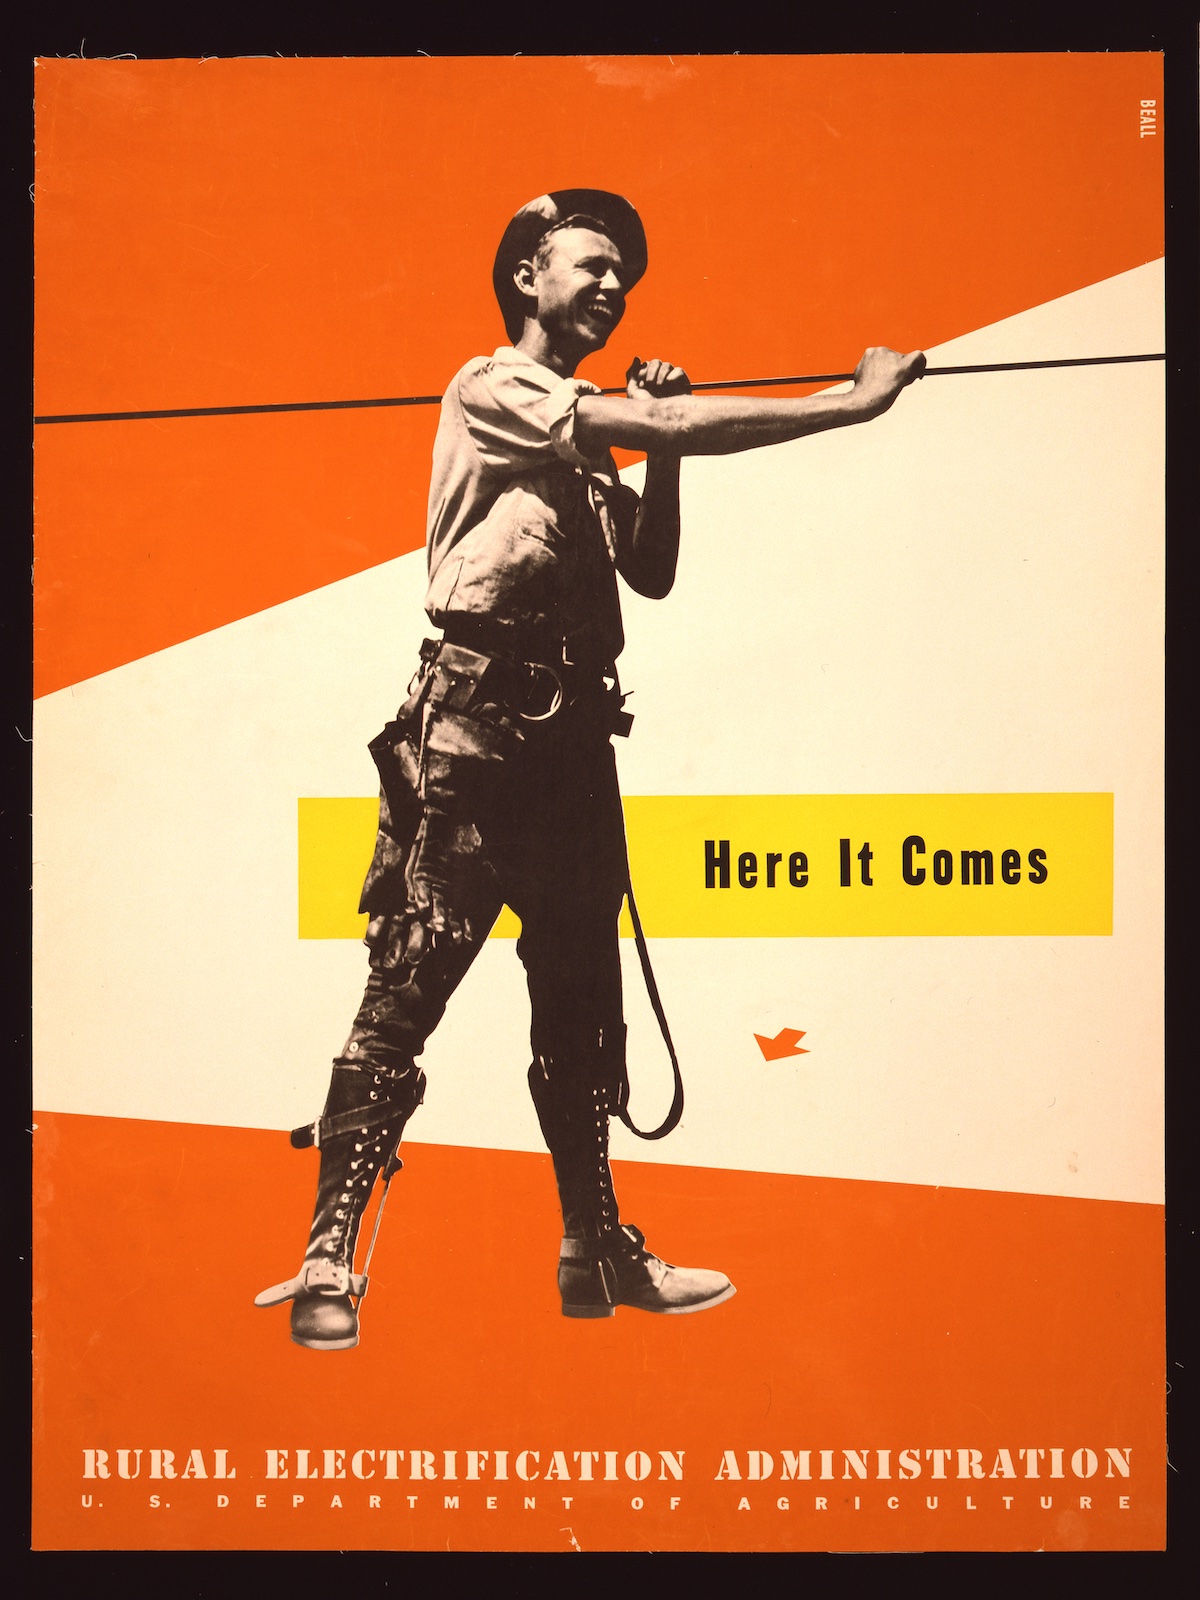 'Here it comes' Rural Electrification poster by Lester Beall - 1930